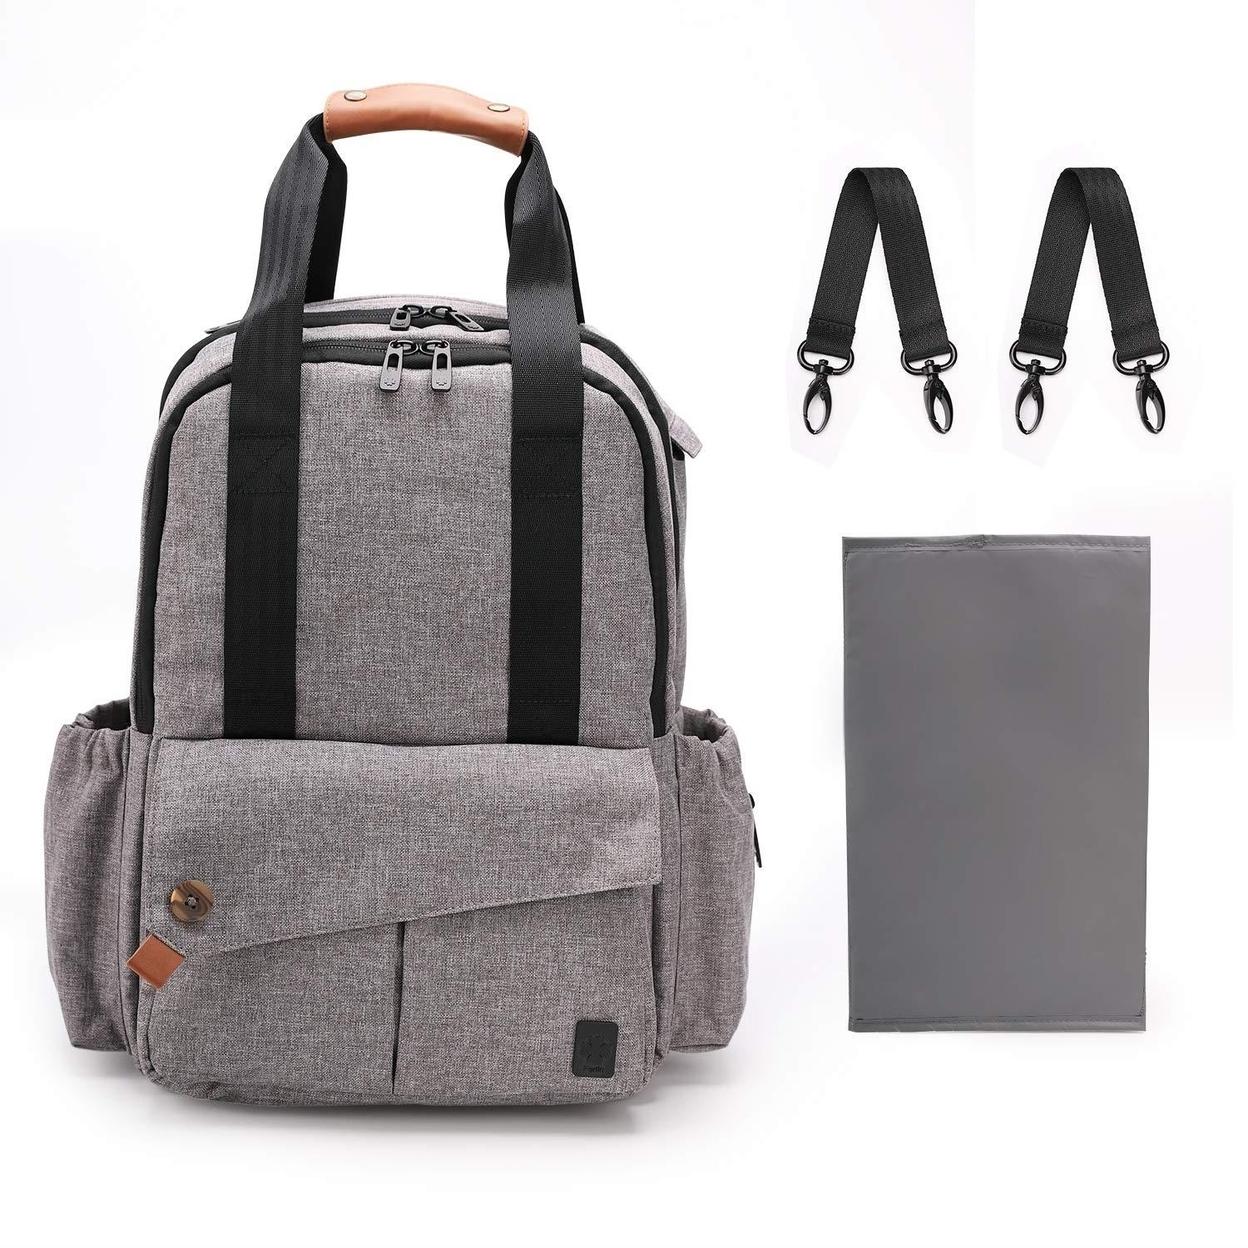 Ferlin Backpack Diaper Bag Gray Unisex With Top Handle Stroller Straps DB0723-2